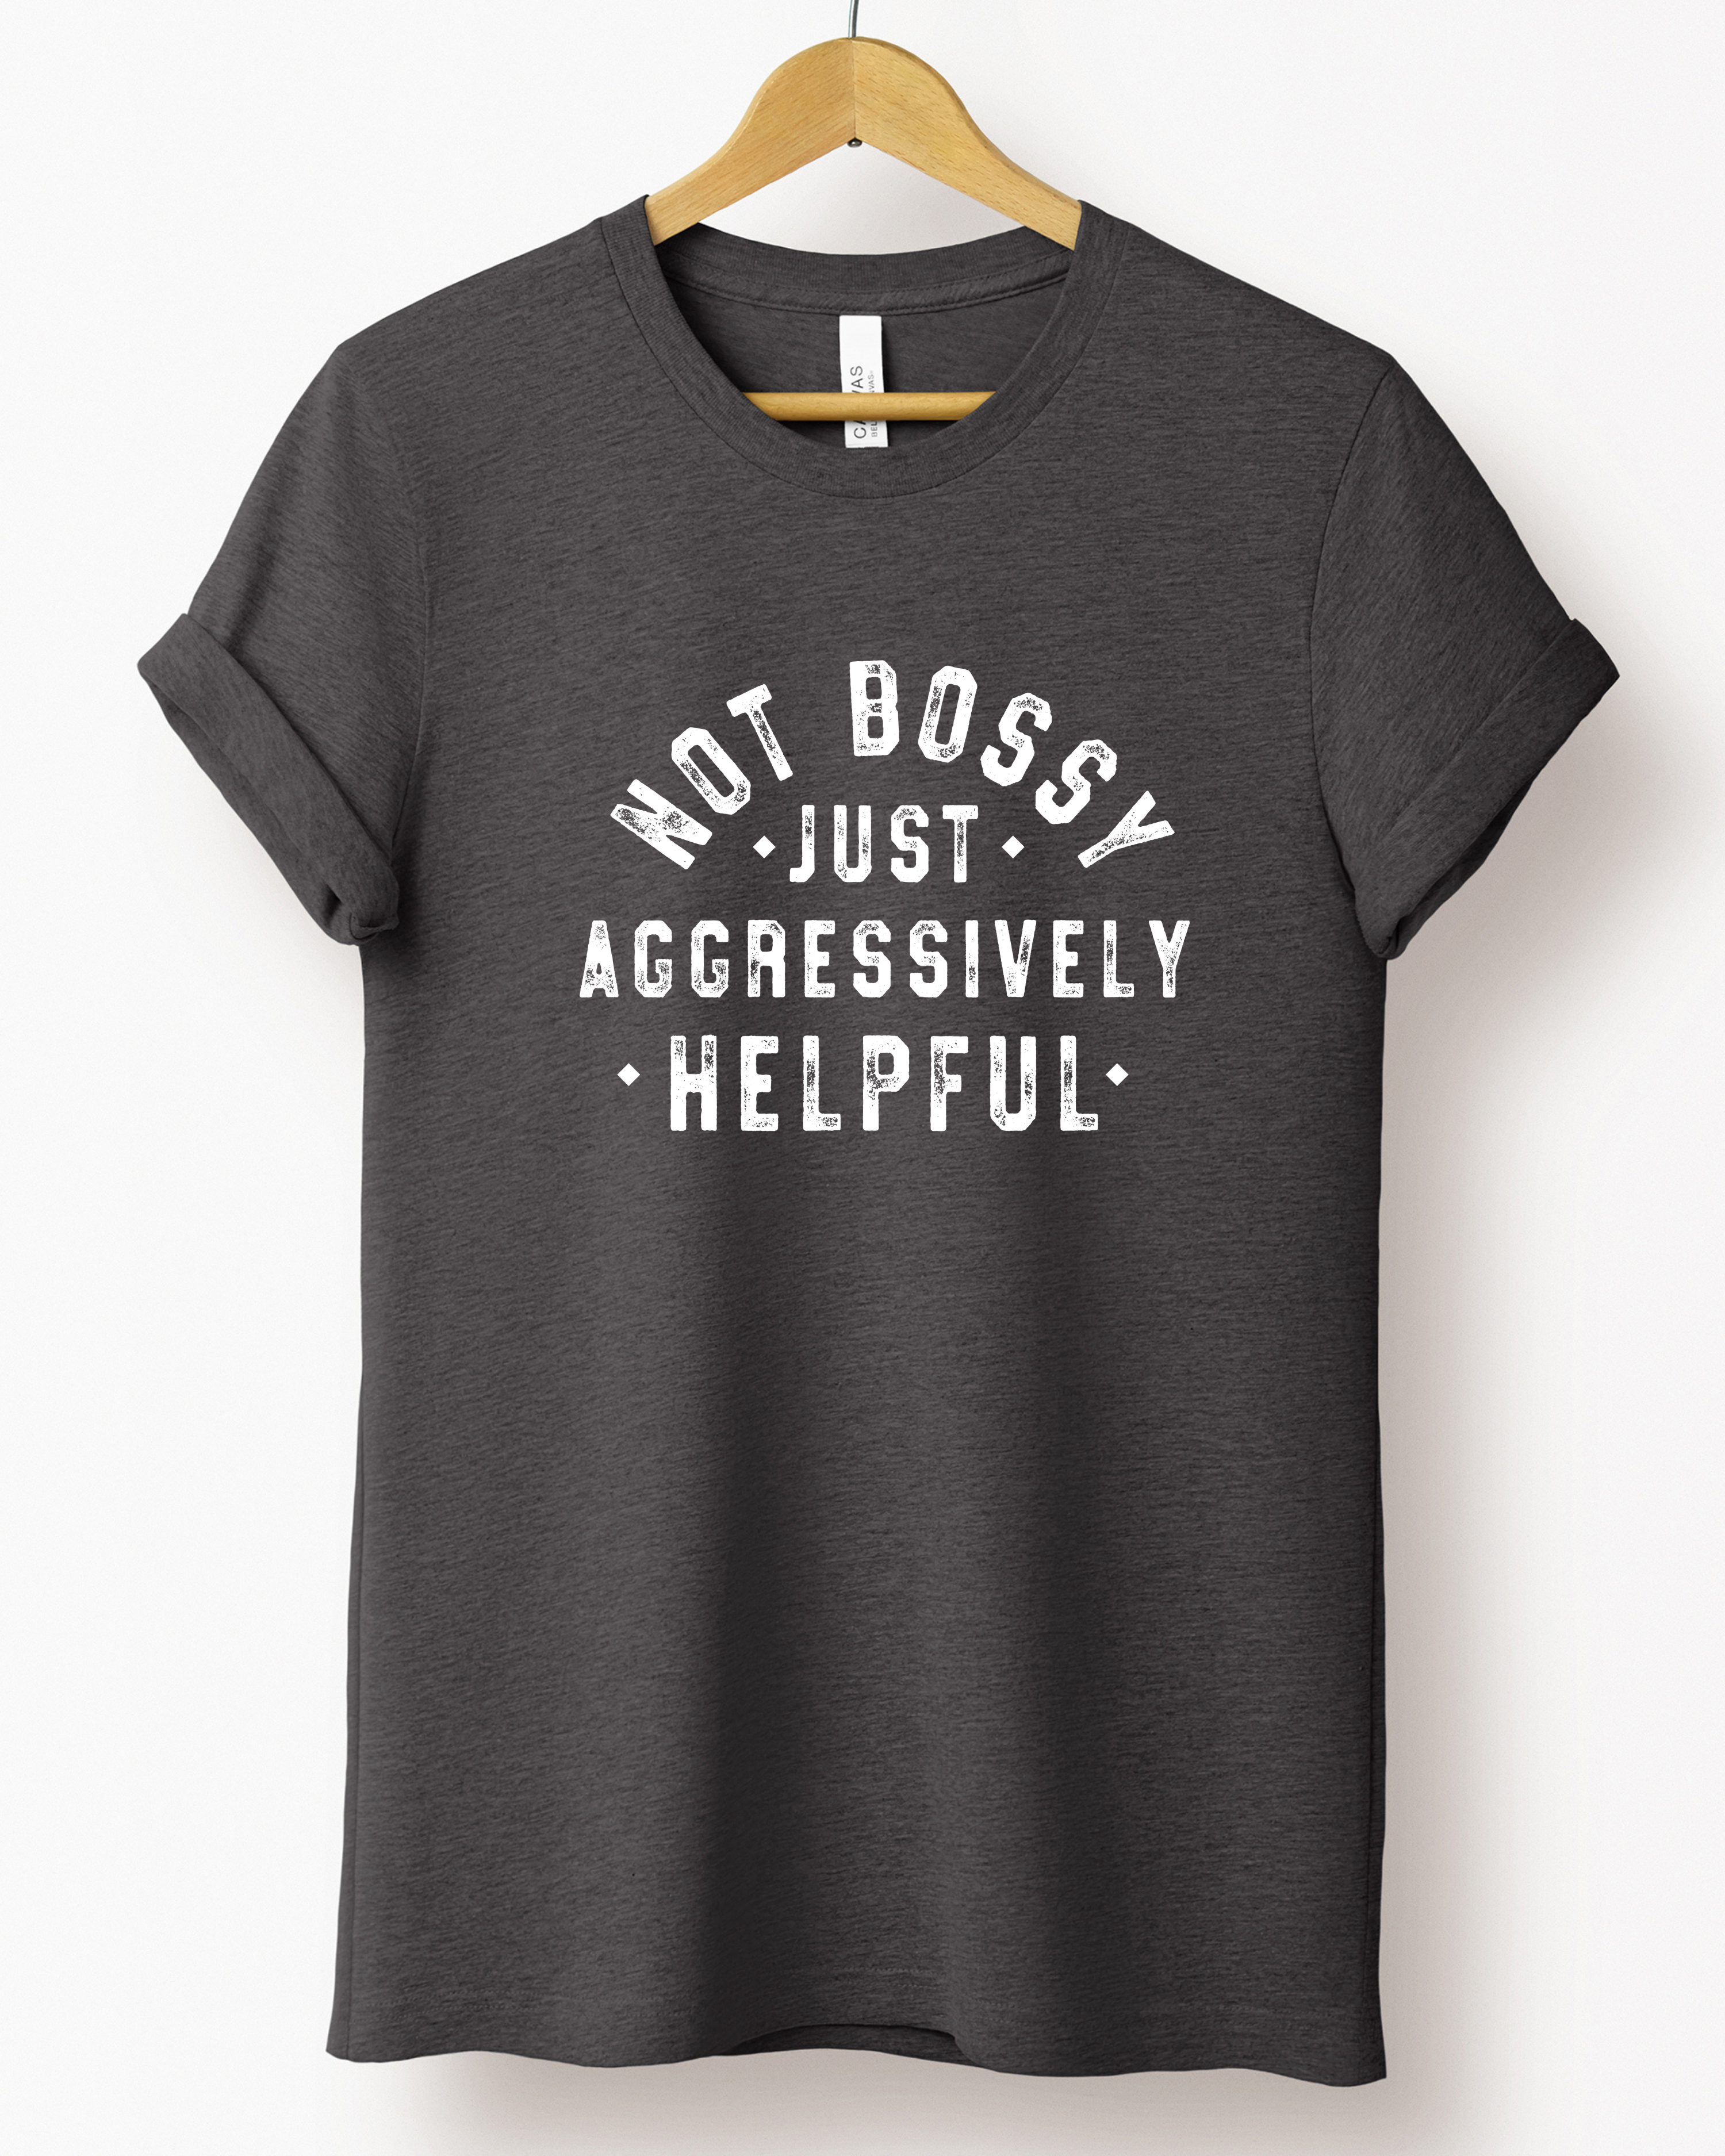 Camiseta con gráfico Not Bossy Just Aggressively Benefits para mujer (Bella Canvas)